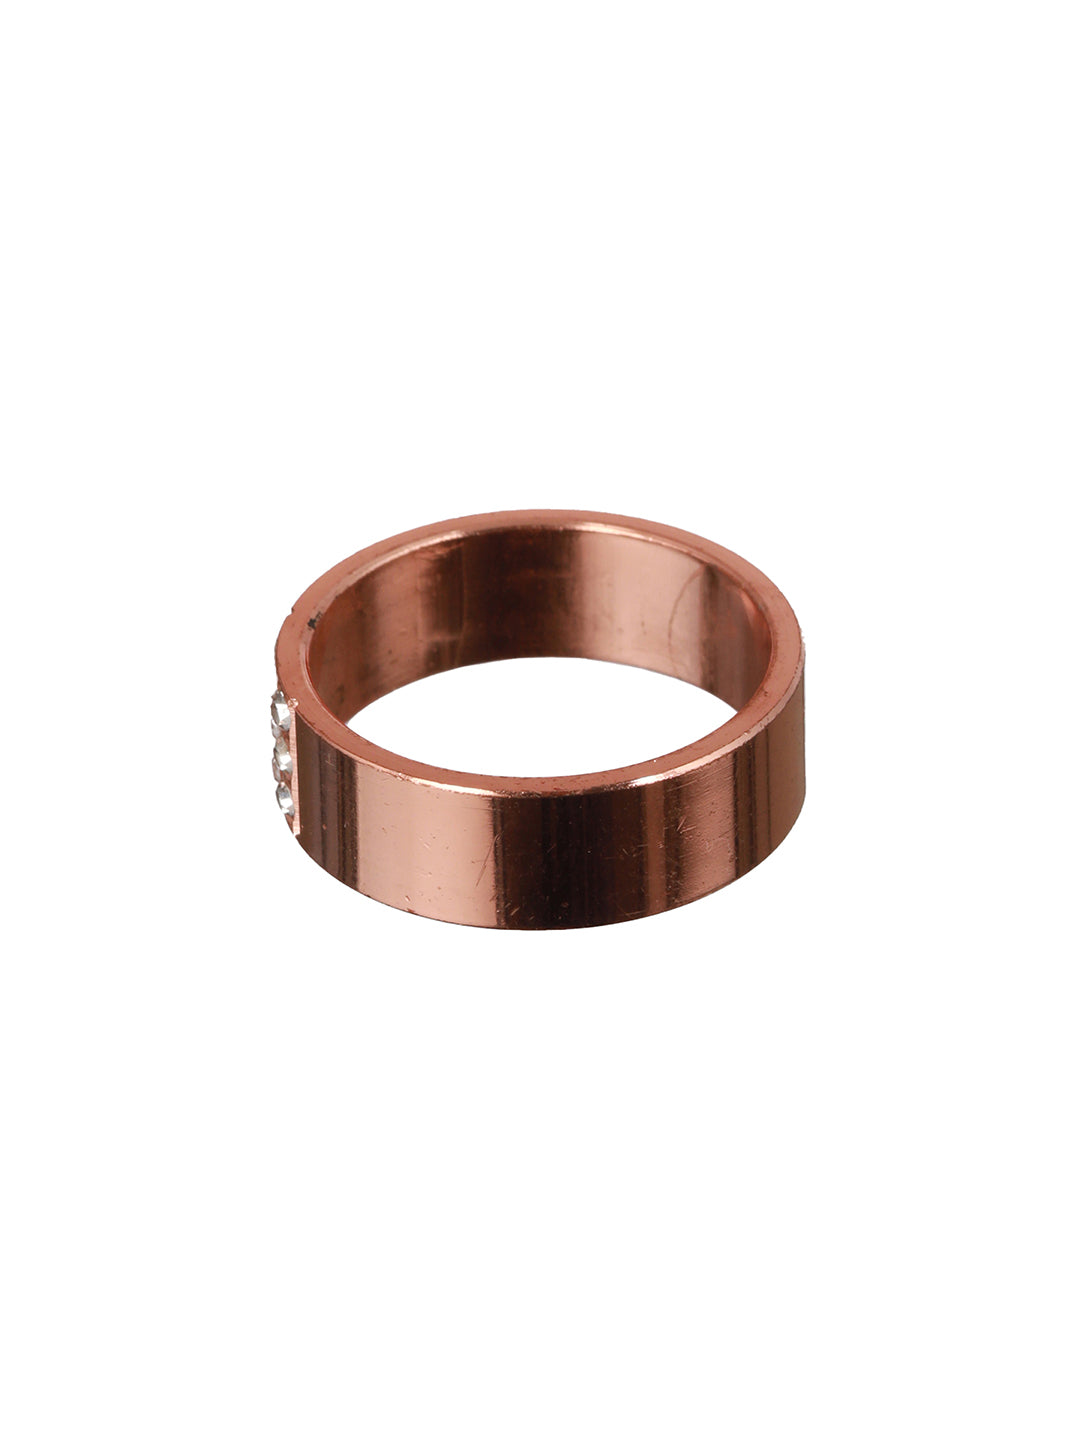 Bold by Priyaasi Band Style AD Rose Gold-Plated Ring for Men